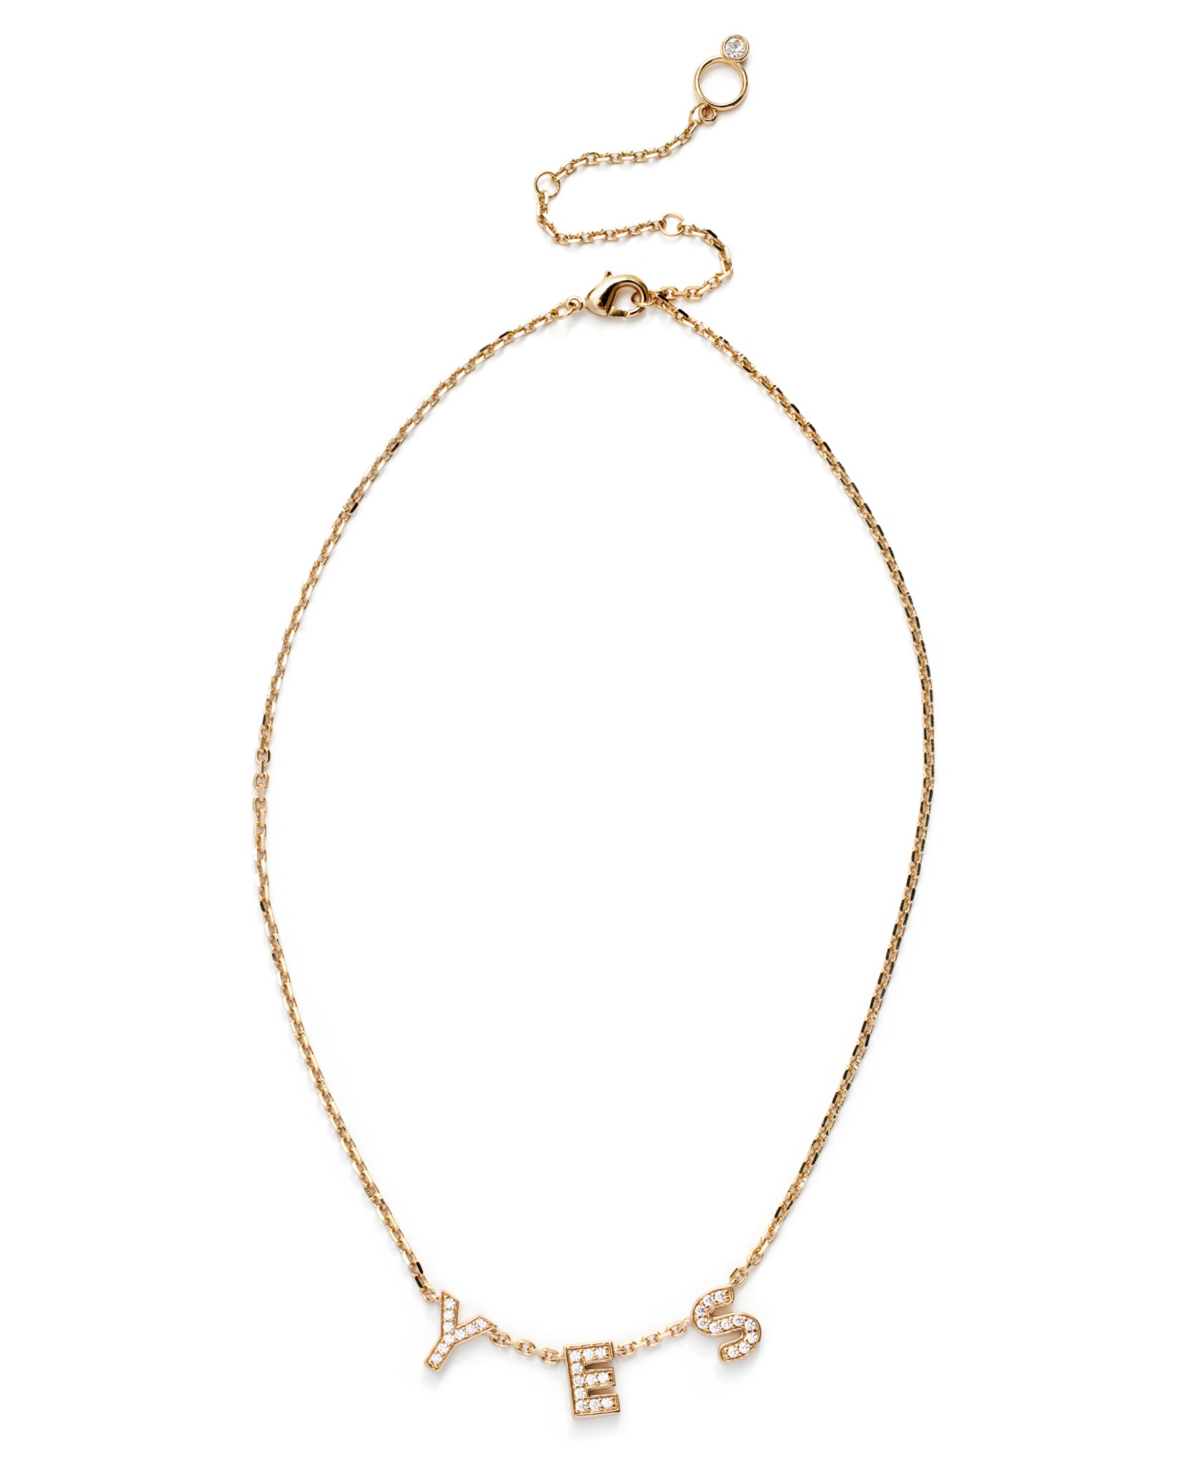 Cubic Zirconia Pave Yes Bib Necklace - Crystal, Gold